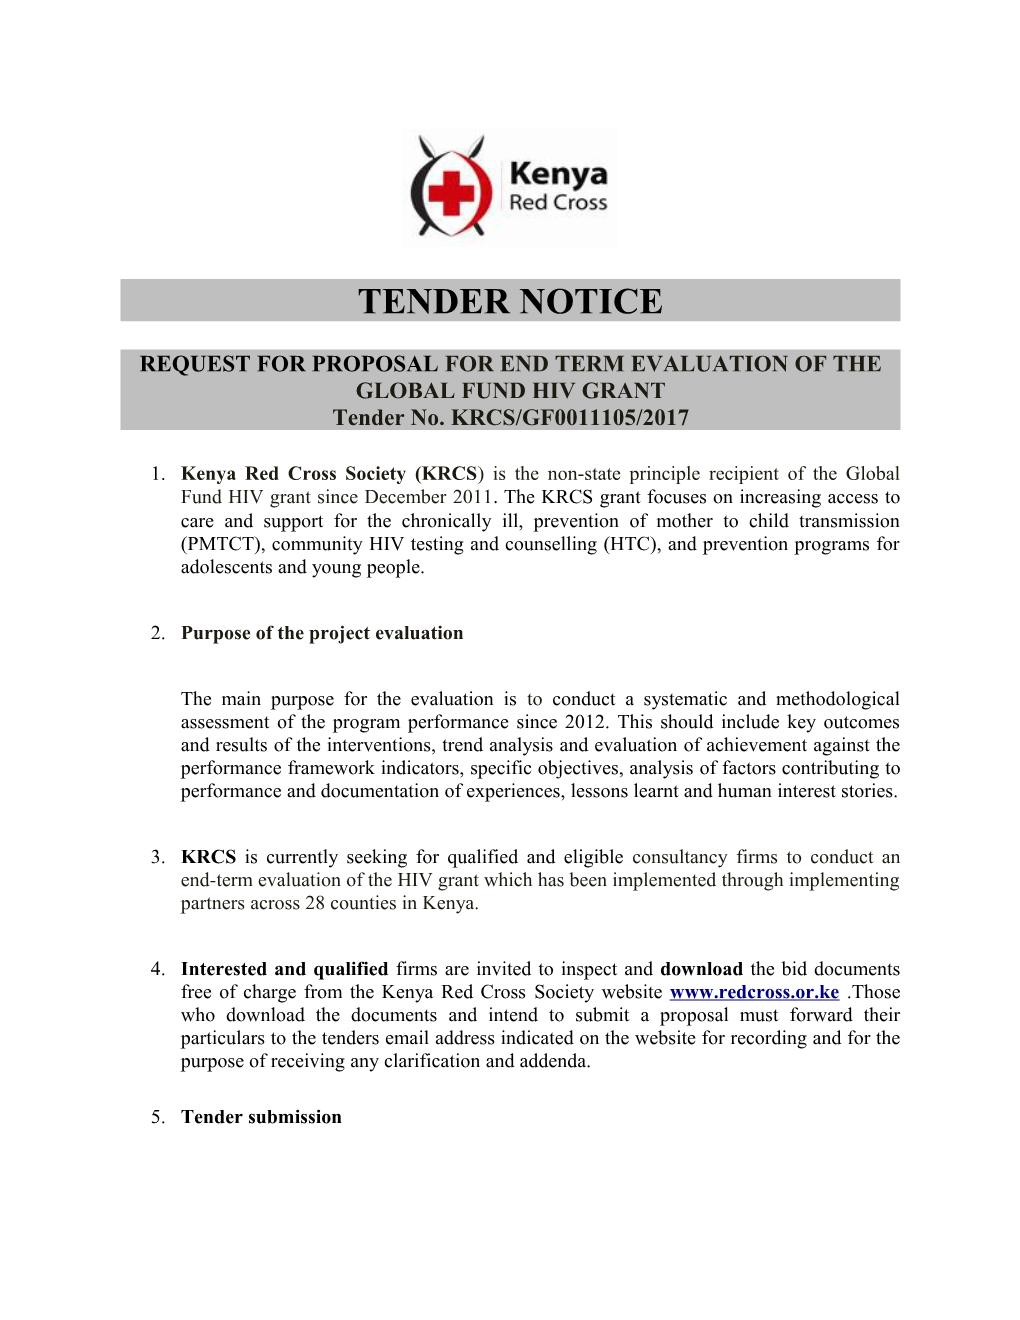 Request for Proposalfor End Term Evaluation of the Global Fund Hiv Grant